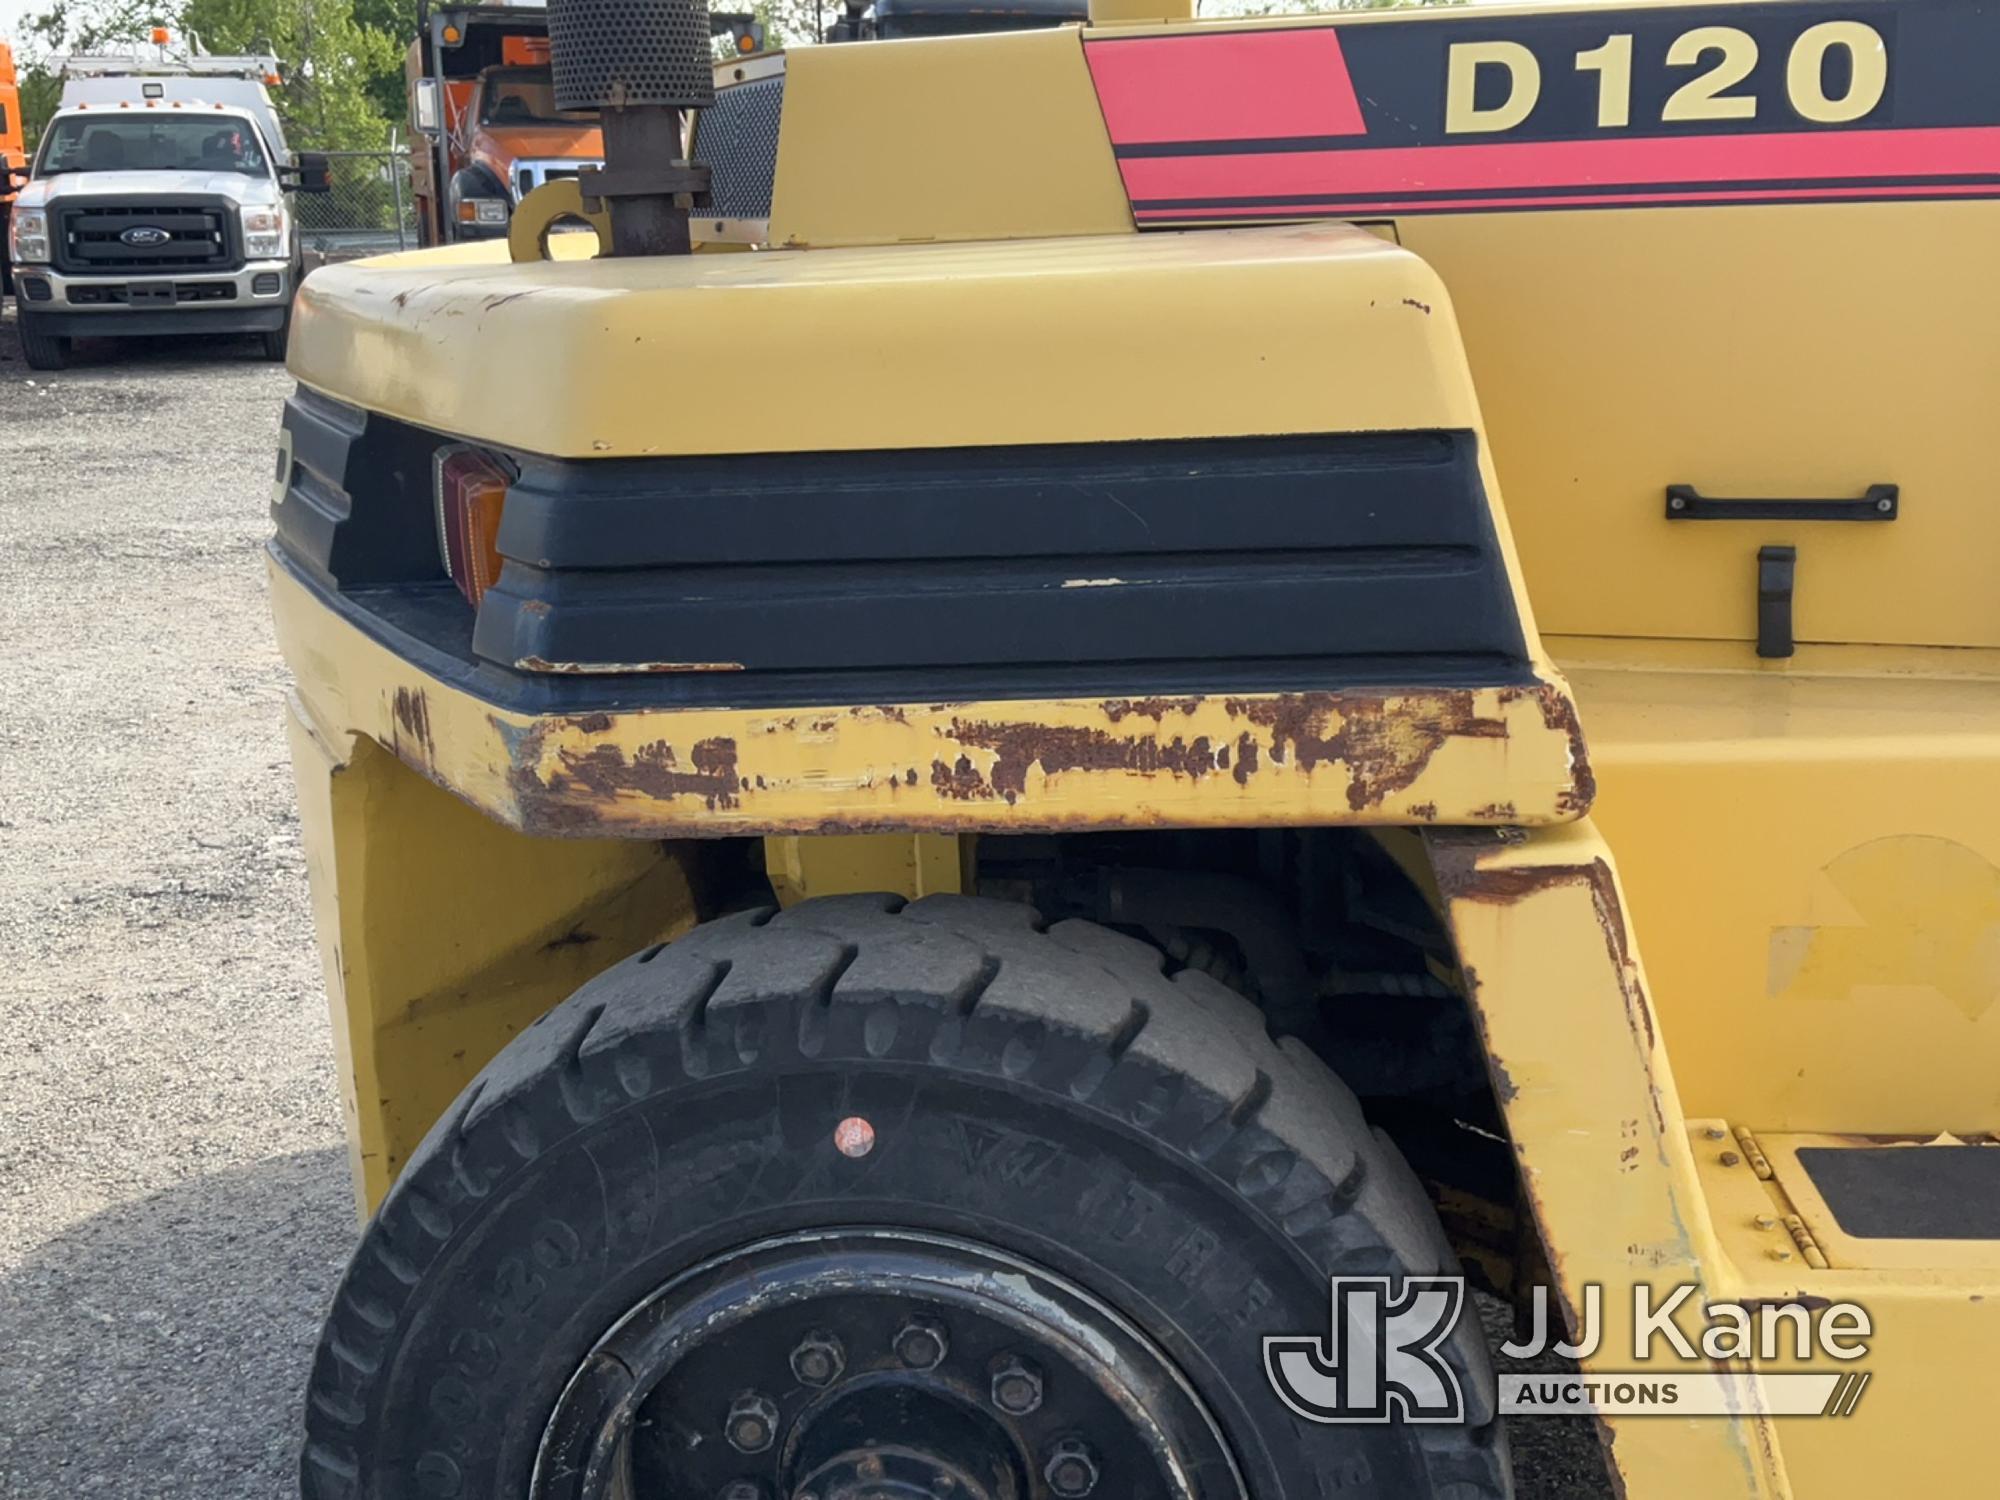 (Plymouth Meeting, PA) 2004 Daewoo D120 Solid Tired Forklift Runs Moves & Operates, Bad Fuel Shut Of